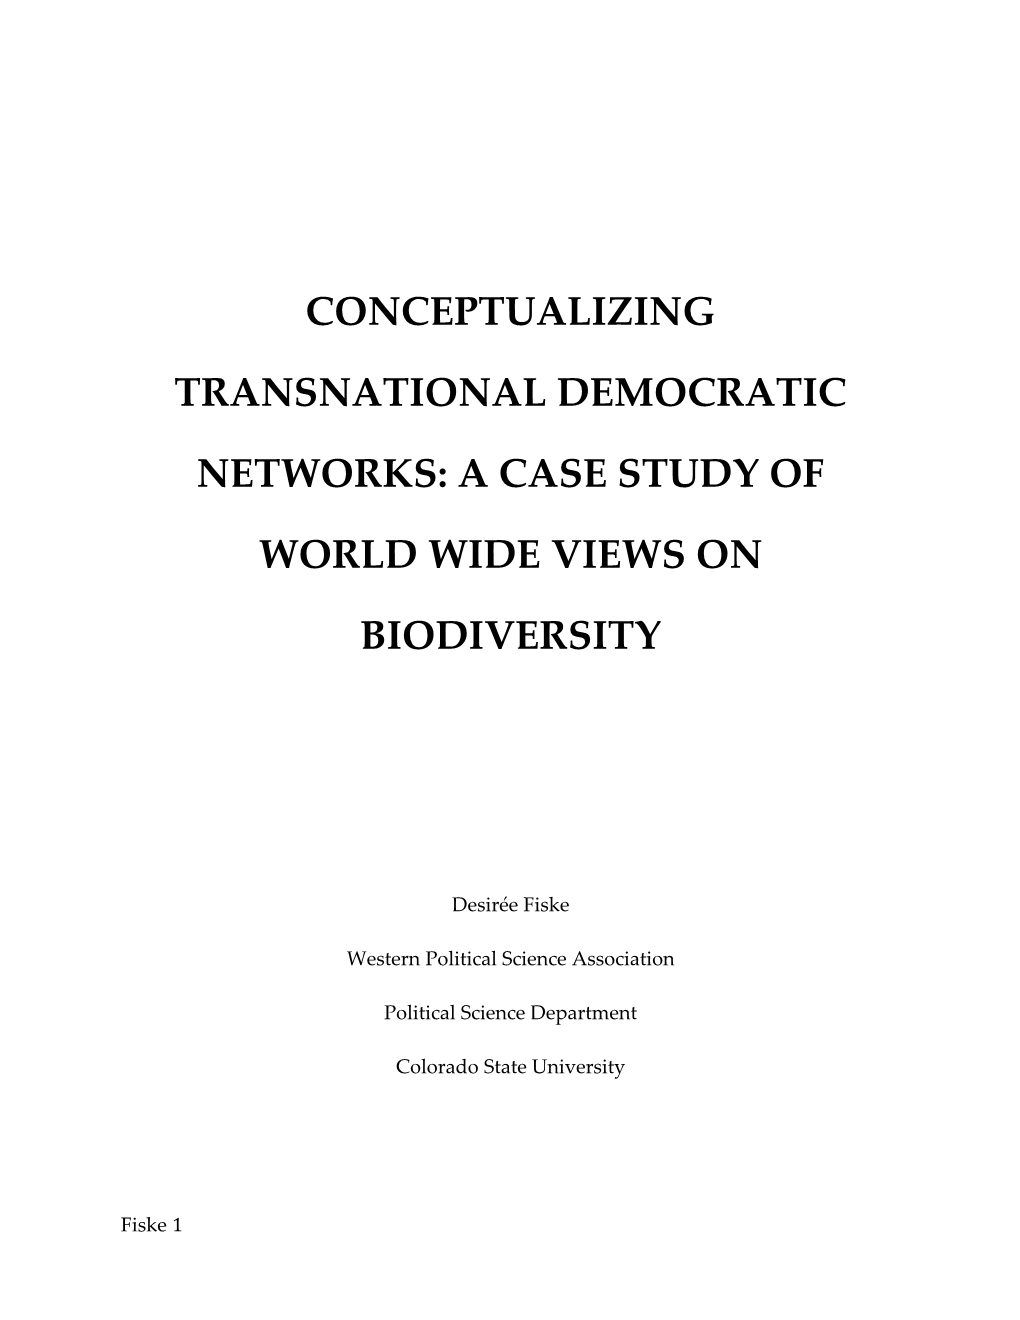 Conceptualizing Transnational Democratic Networks: a Case Study of World Wide Views On